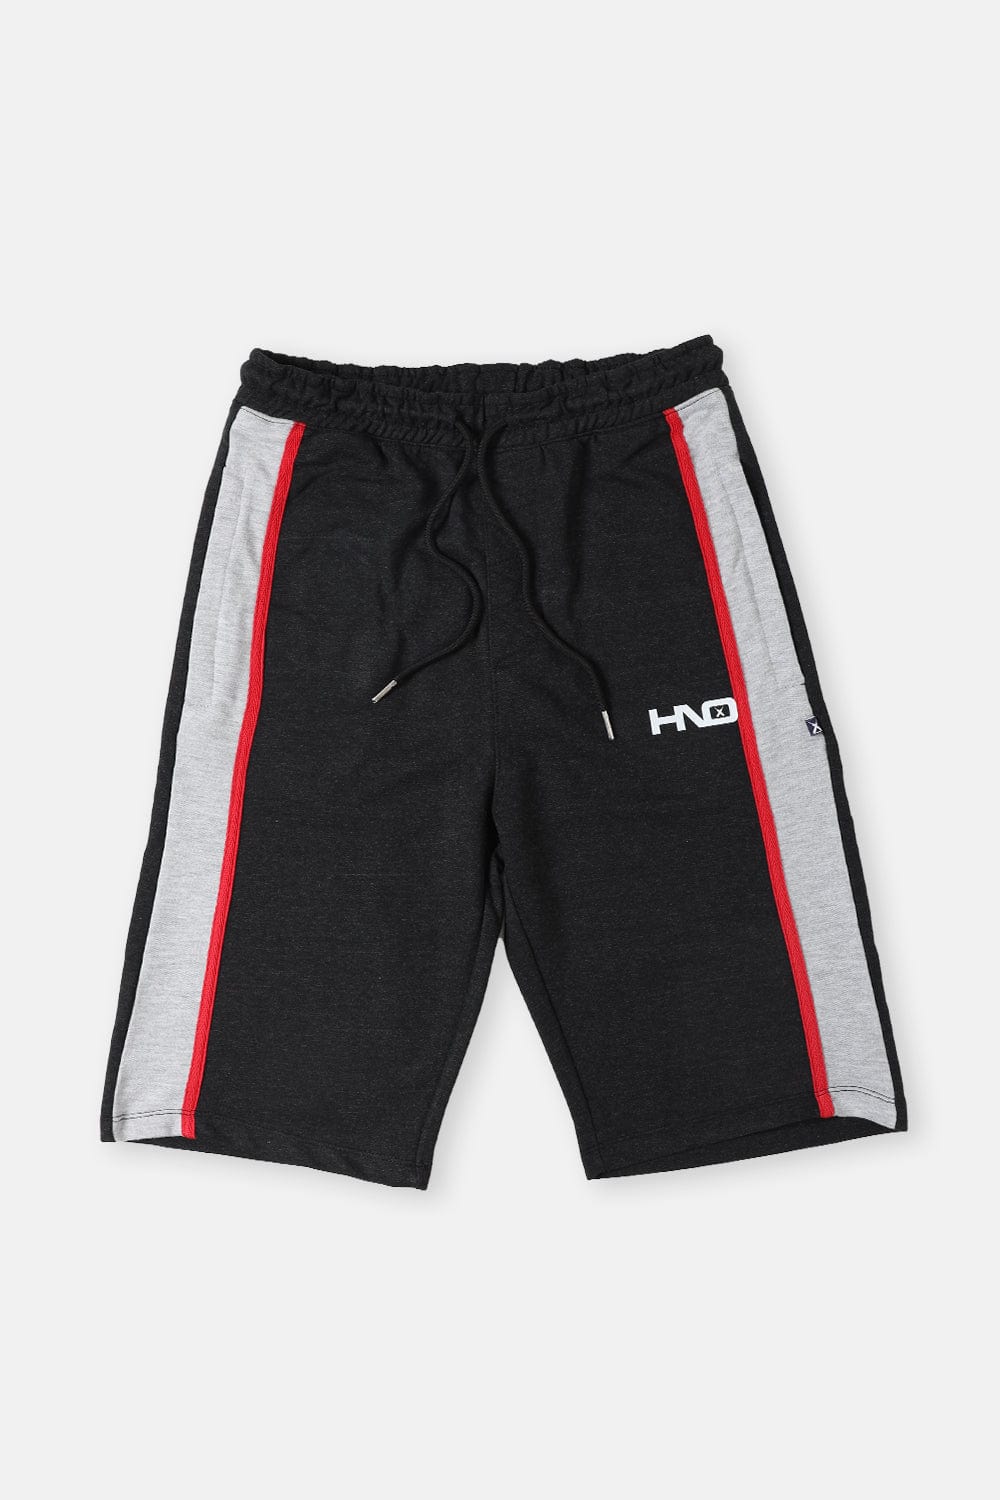 Hope Not Out by Shahid Afridi Men Shorts Black Panelled Shorts